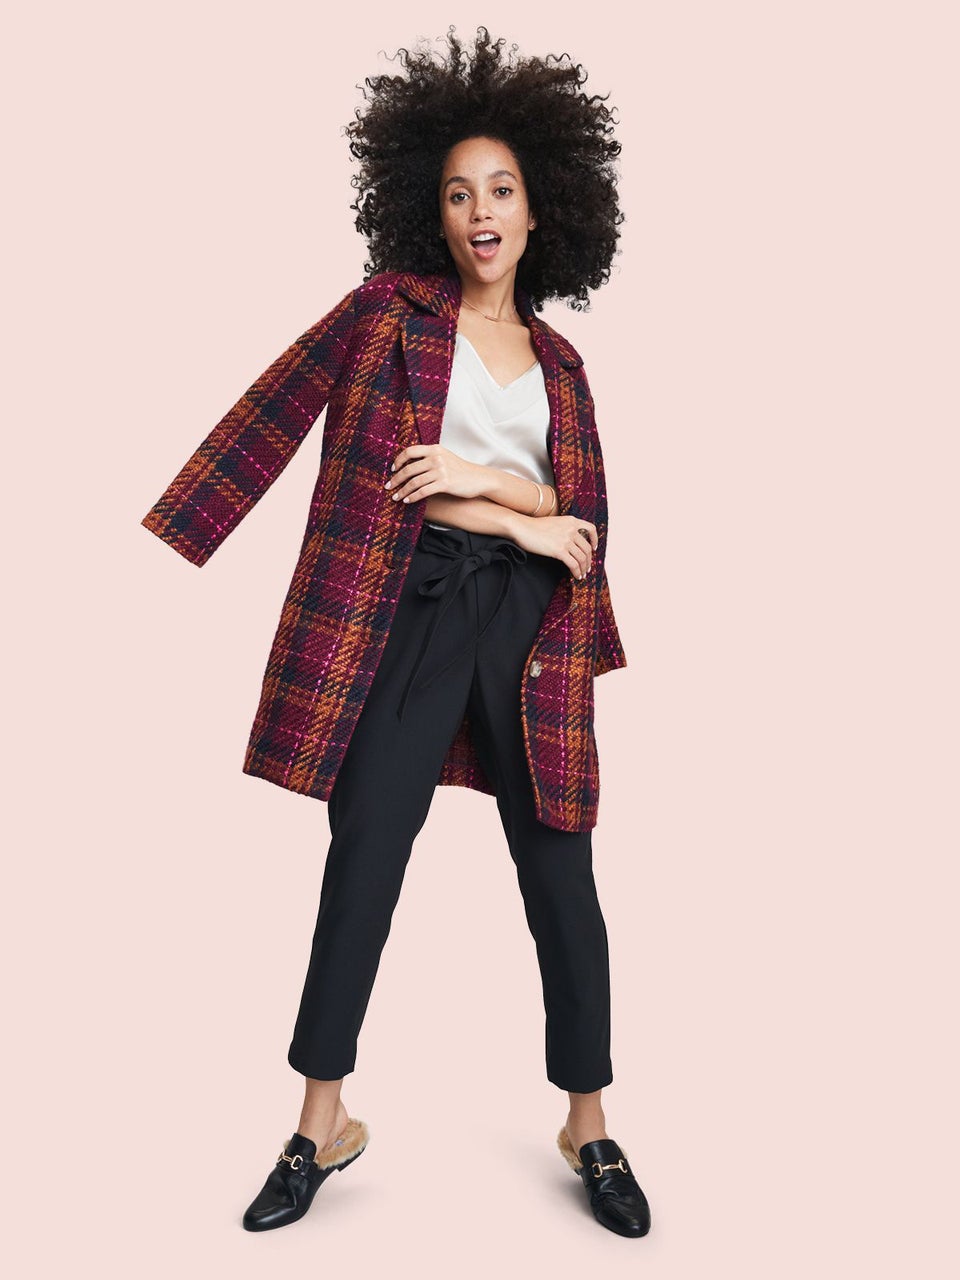 Target Debuts A New In-House Women’s Fashion Line And It’s Really Cute 